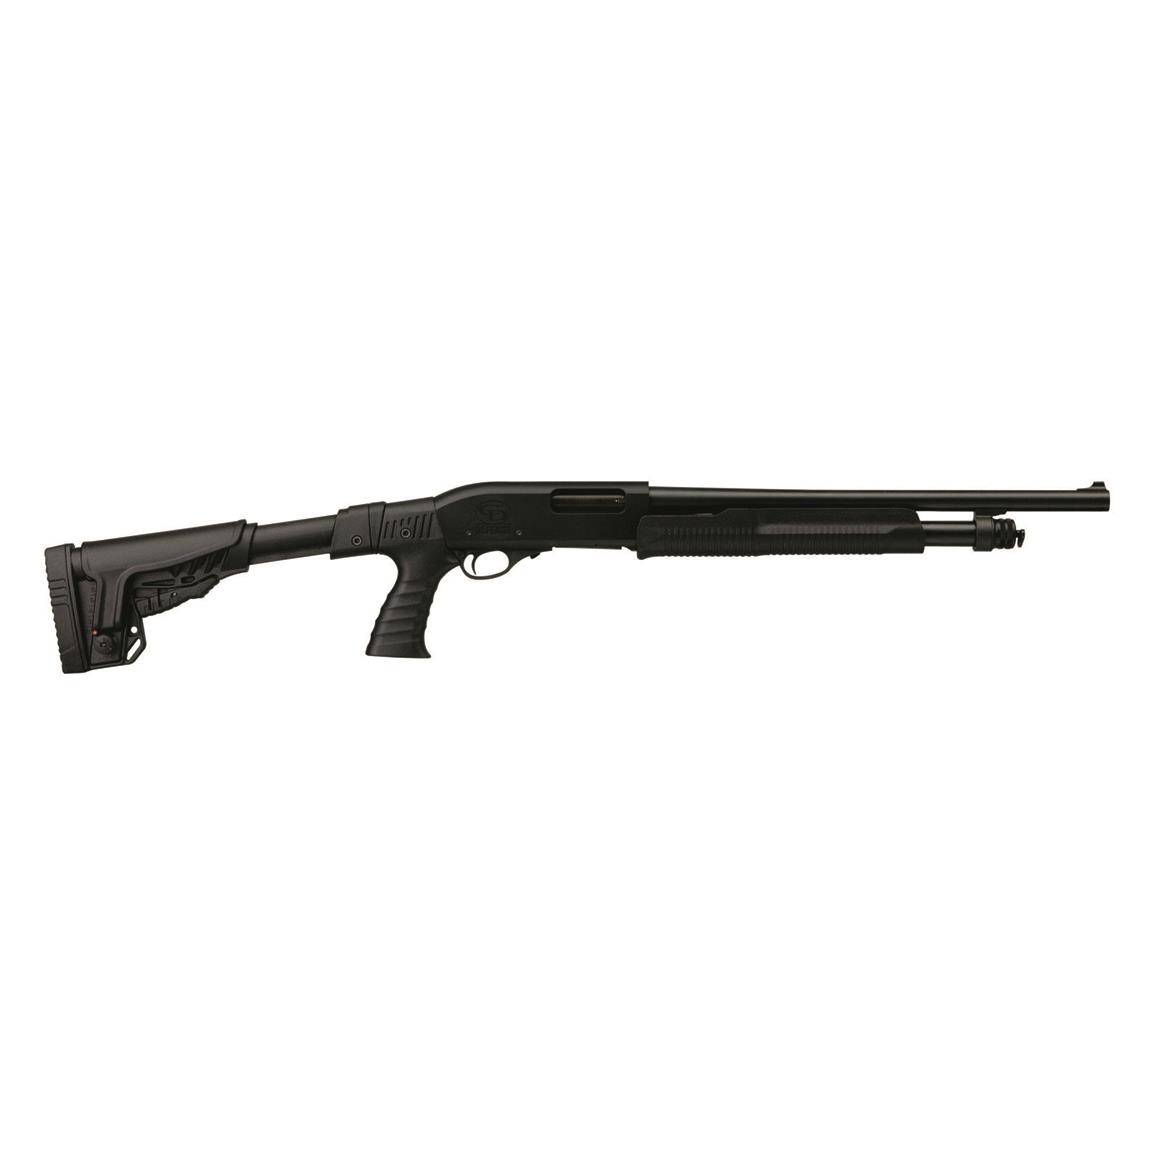 Chiappa Charles Daly 300T Tactical, Pump Action, 12 Gauge, 18.5" Barrel, 5+1 Rounds